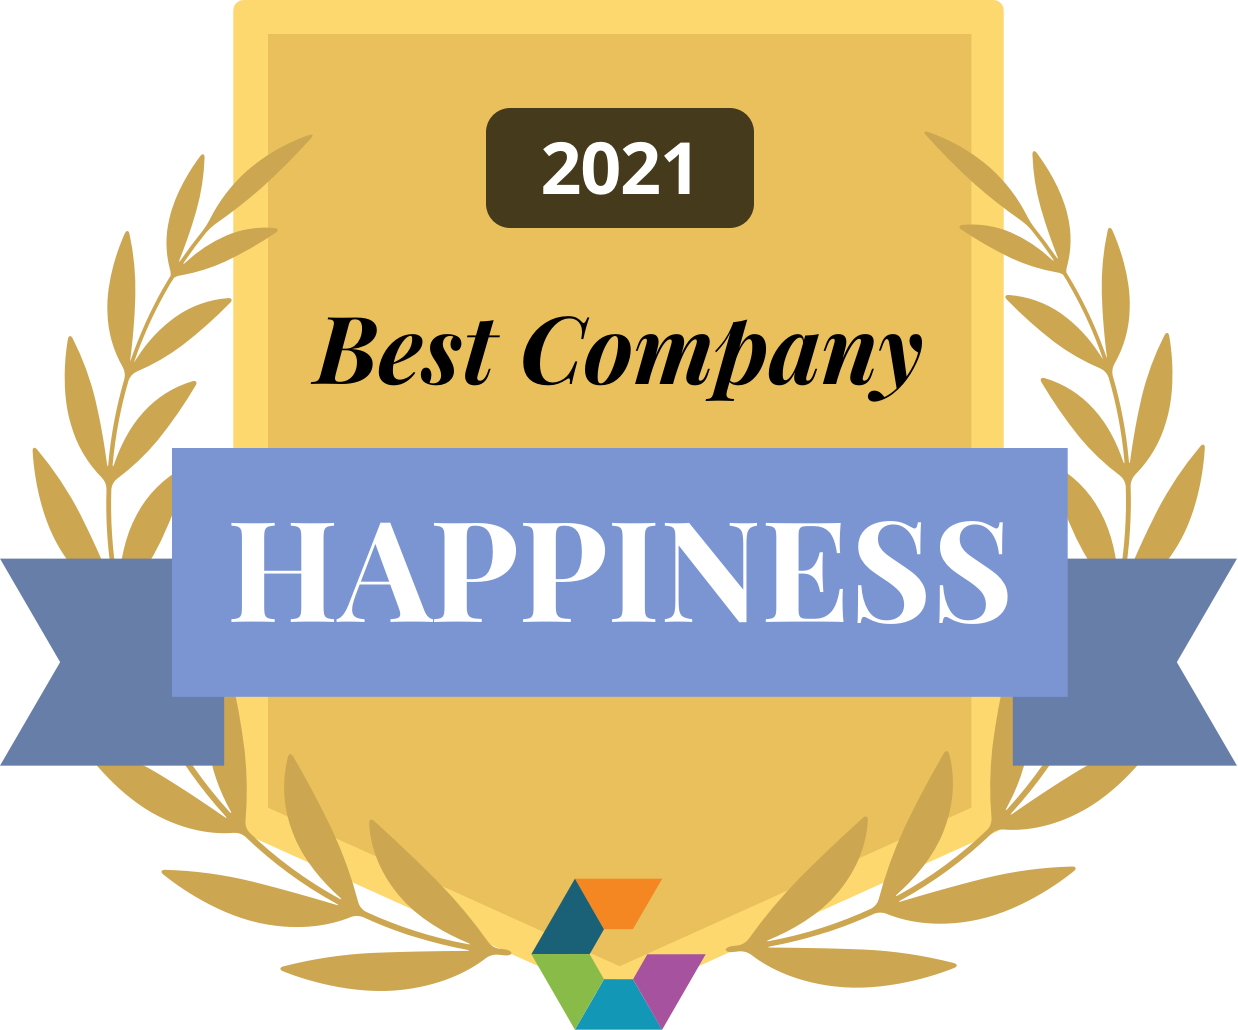 Comparably Best Company for Happiness